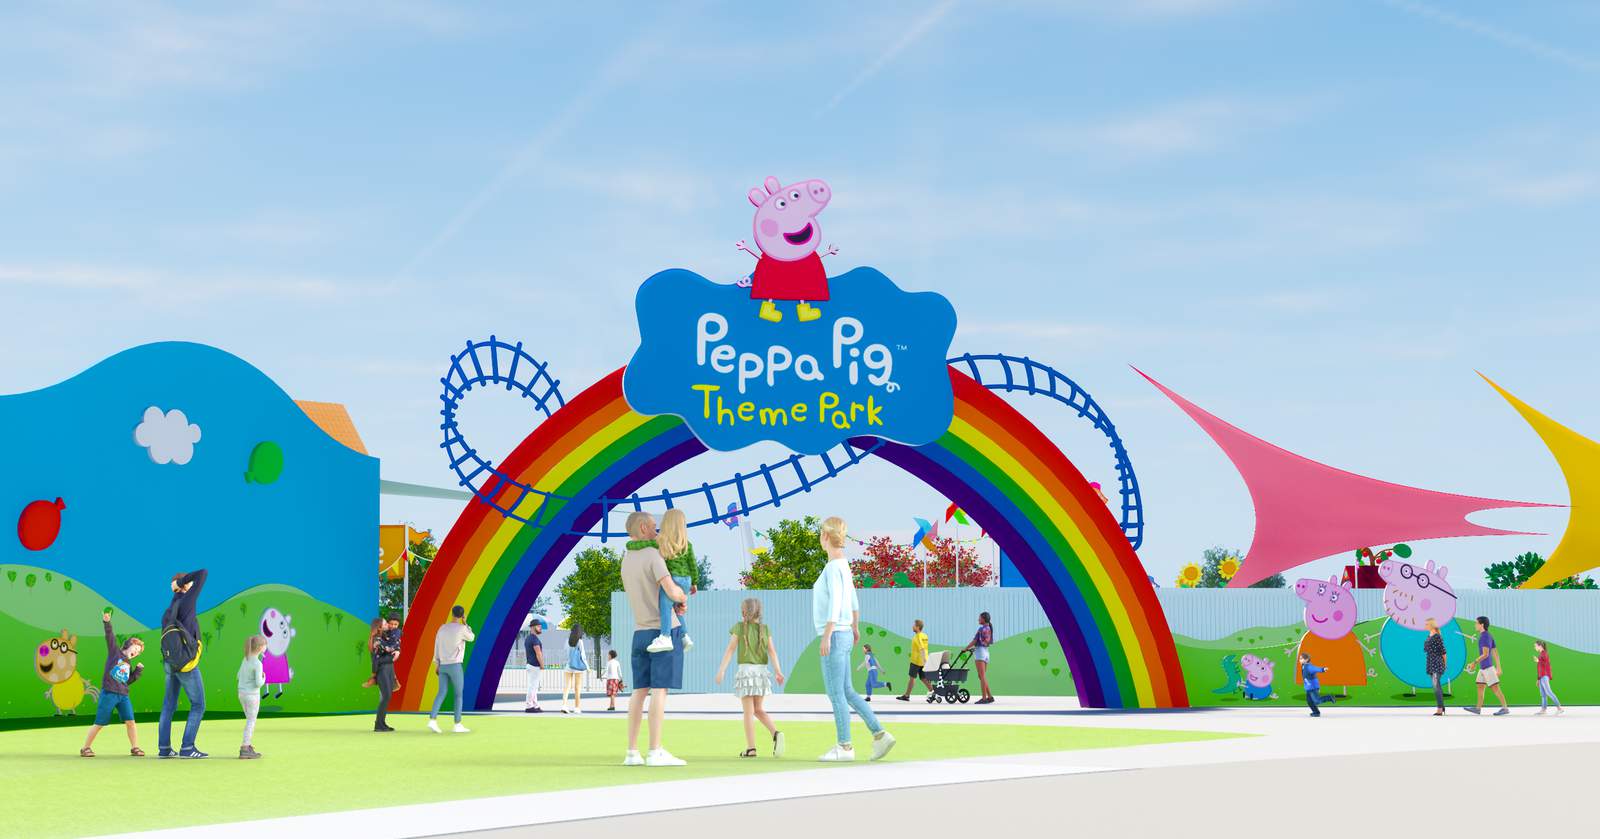 World’s first Peppa Pig theme park coming to Florida